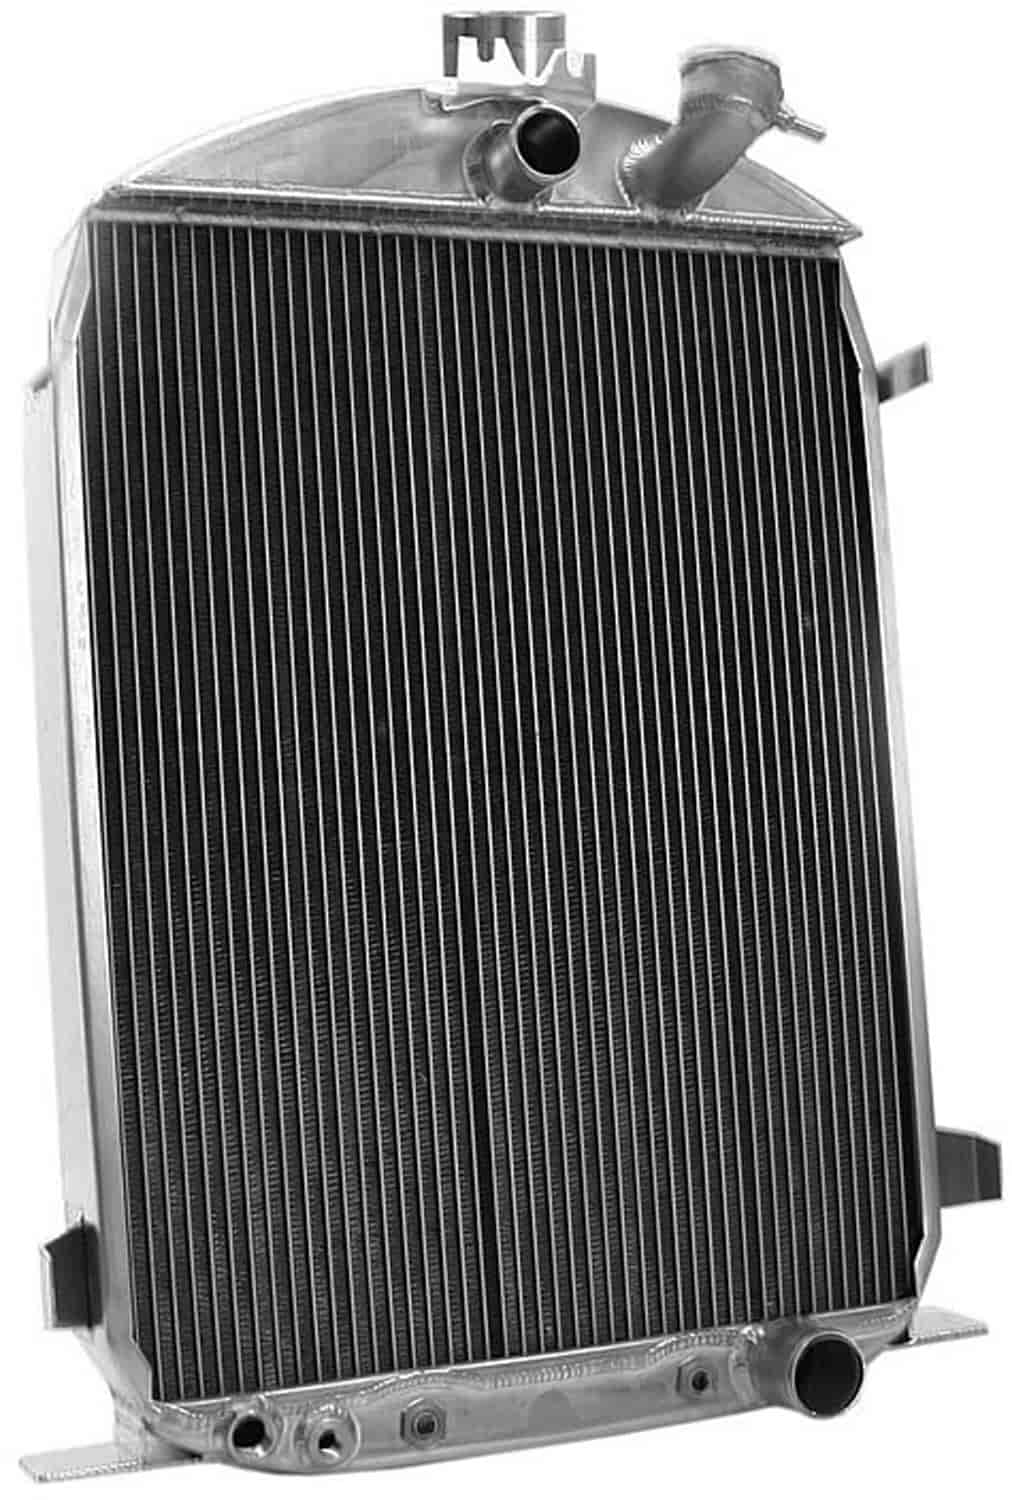 ExactFit Radiator for 1930-1931 Model A with Early GM Engine; Dummy Filler Neck & Hood Rod Options